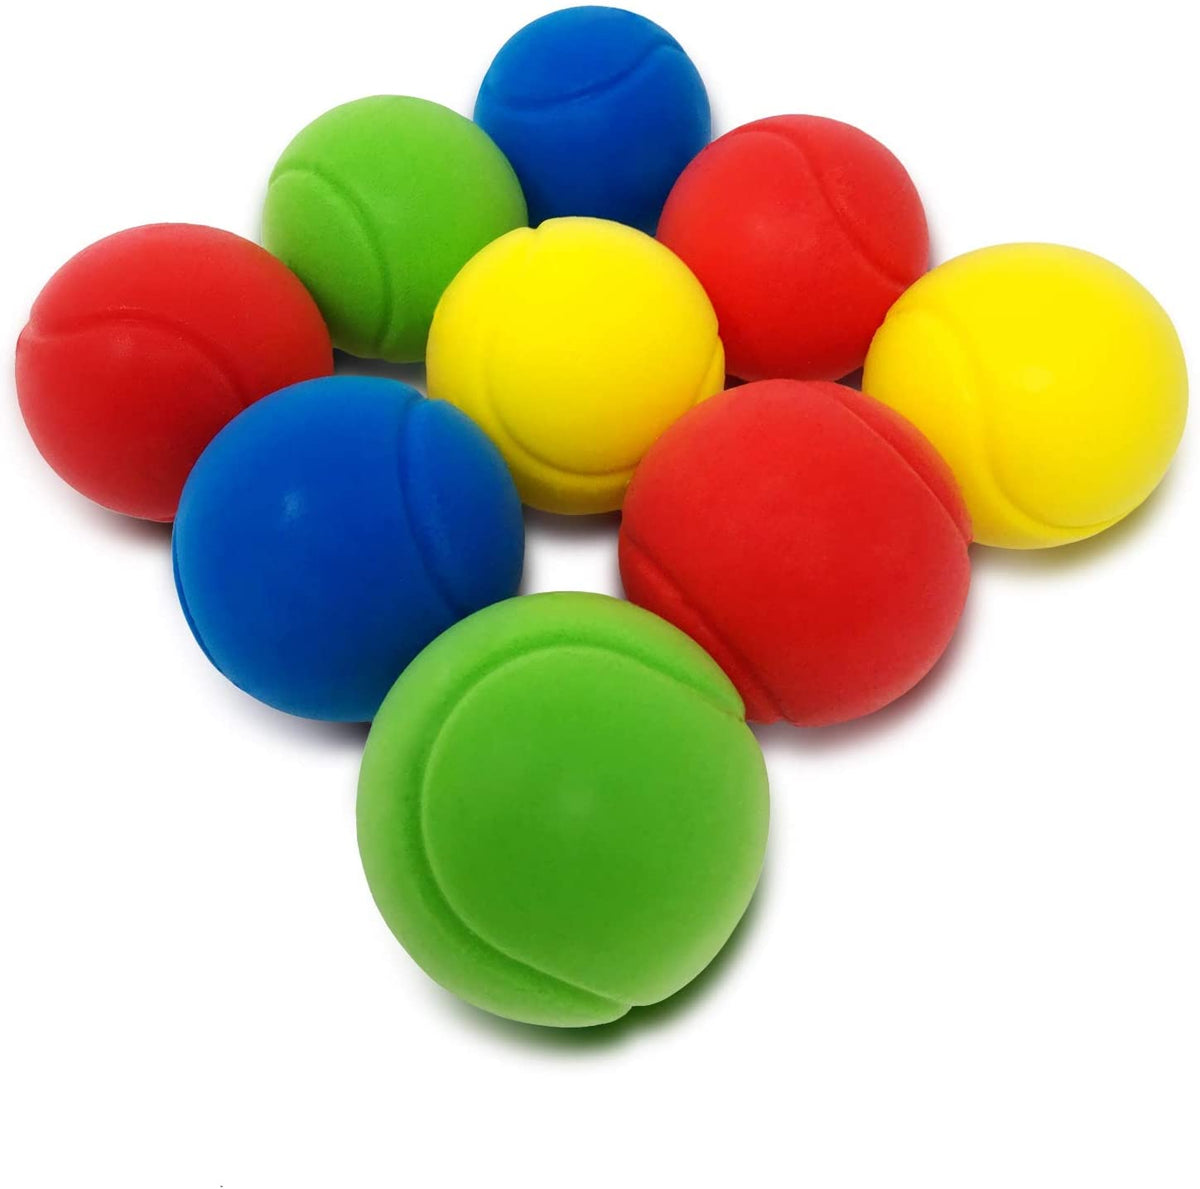 Blue, Red, Yellow Details about   Pack of 3 70mm Soft Foam Tennis Balls 